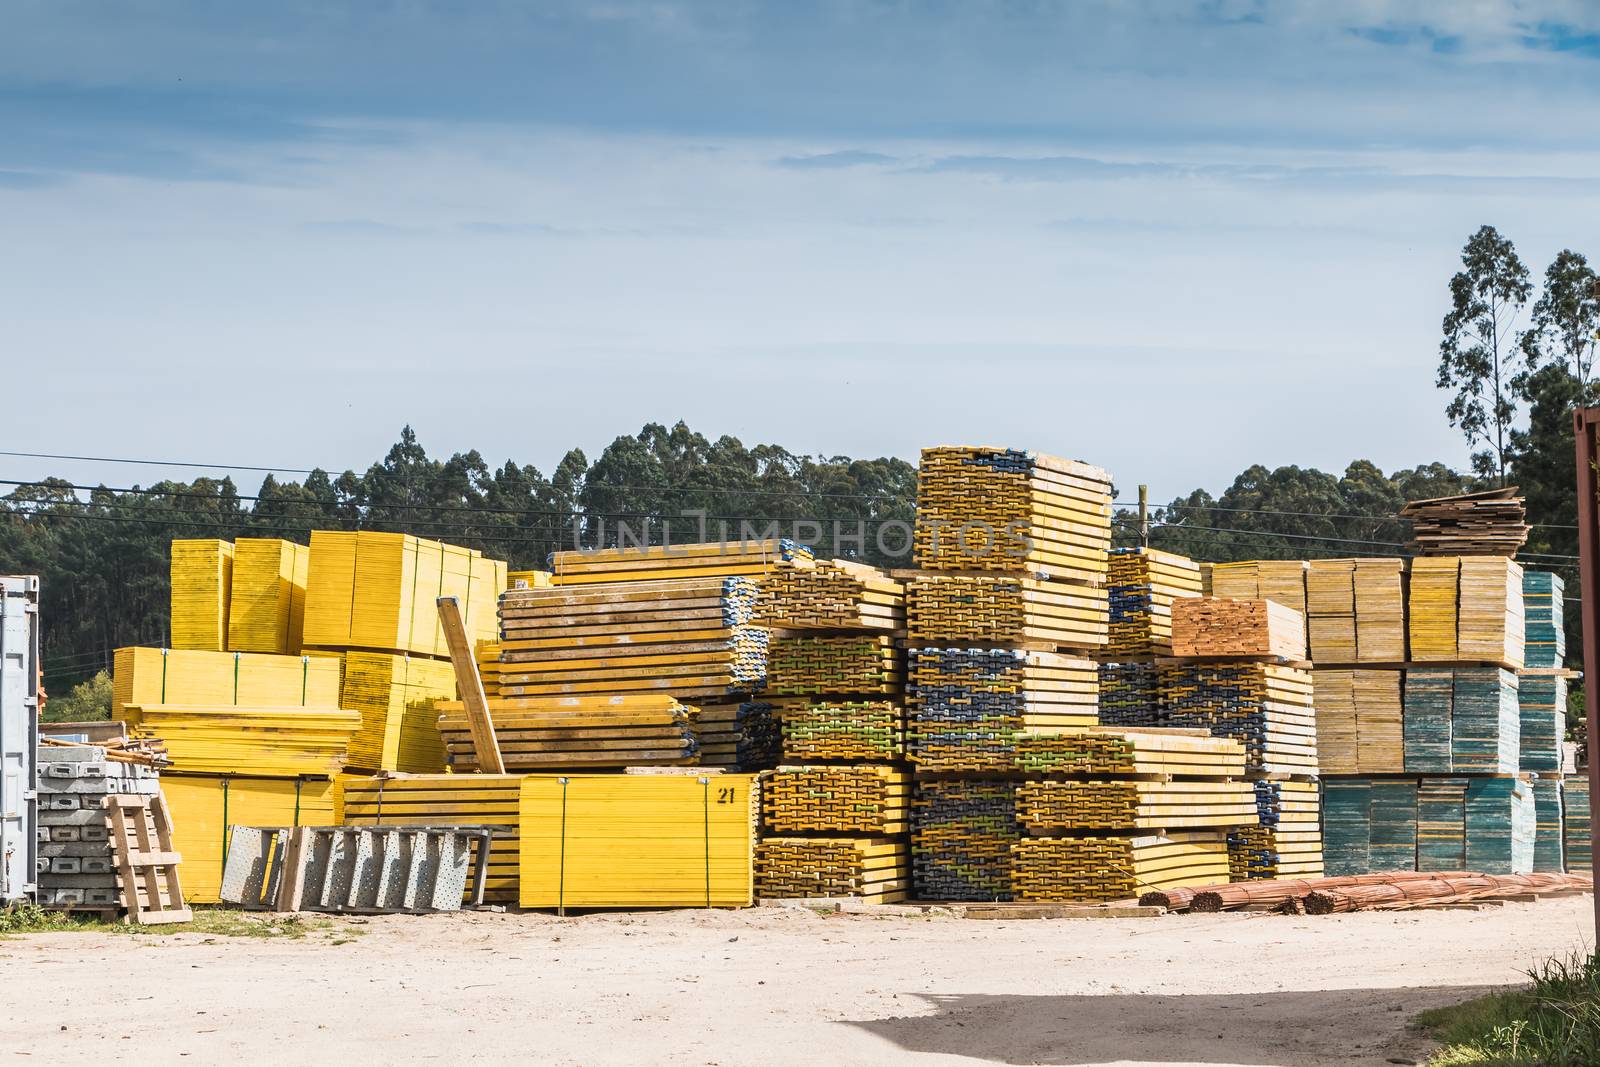 Pallet wood storage in a company in vila cha, portugal by AtlanticEUROSTOXX